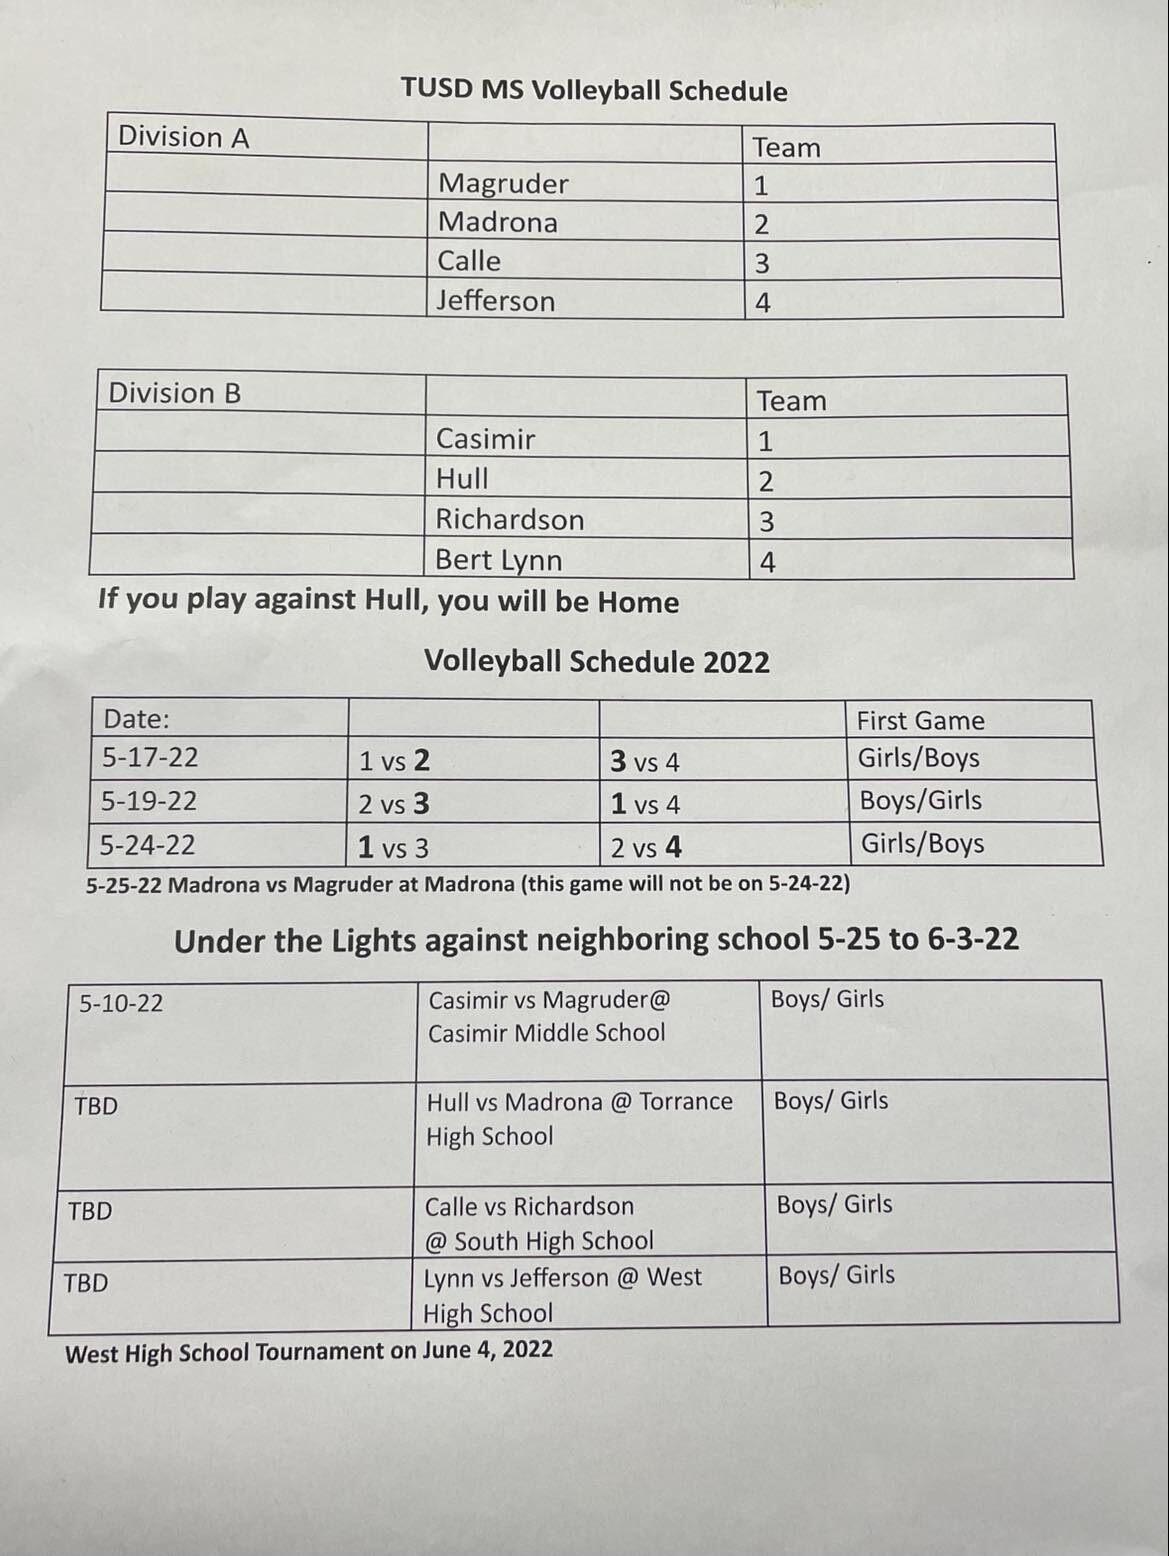 TUSD Middle School Volleyball Schedule